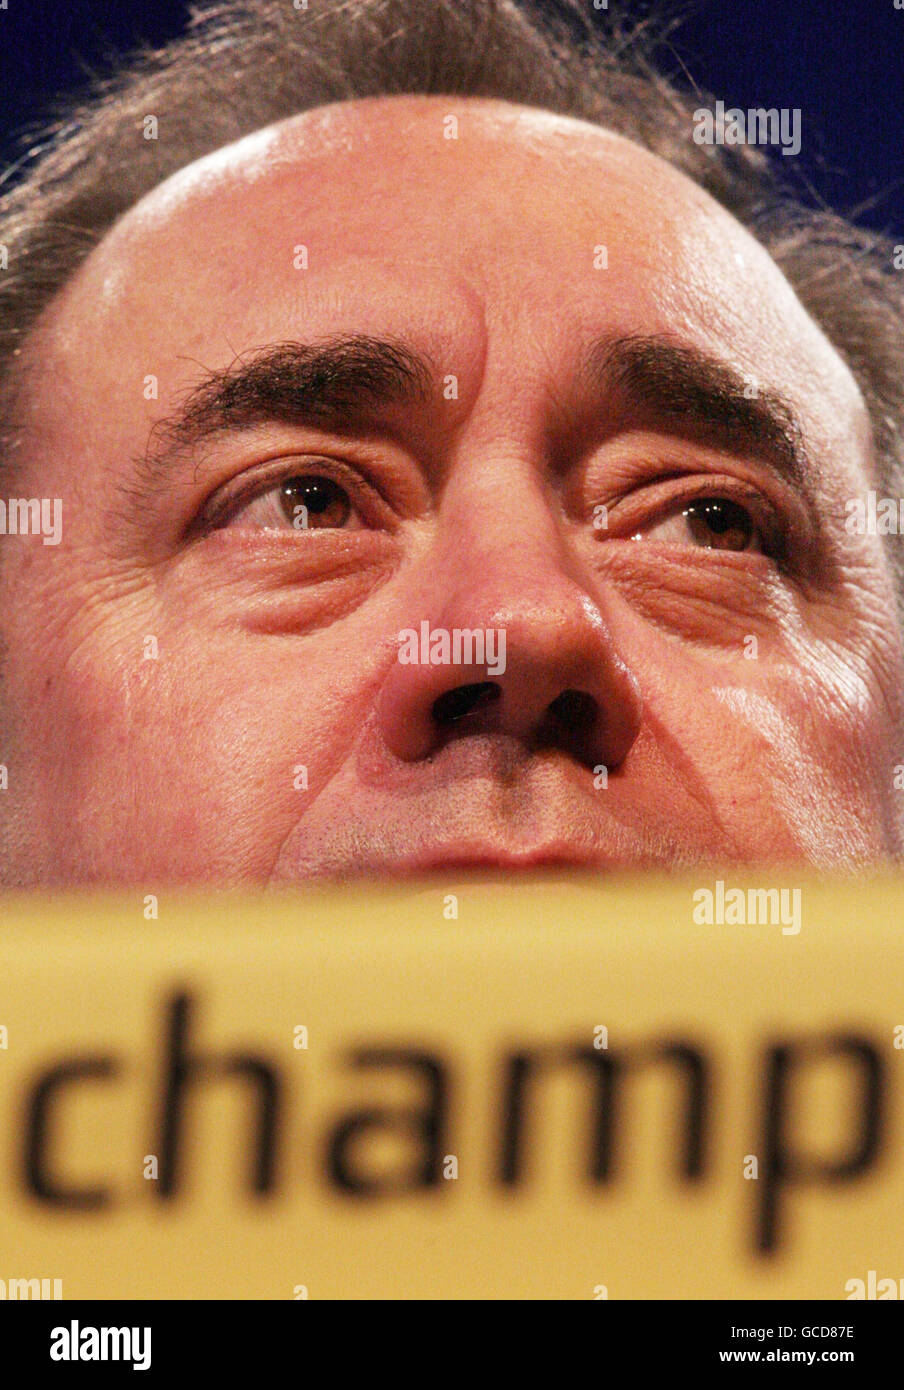 SNP leader Alex Salmond speaks at the Scottish National party spring conference in Aviemore in the Highlands of Scotland. Stock Photo